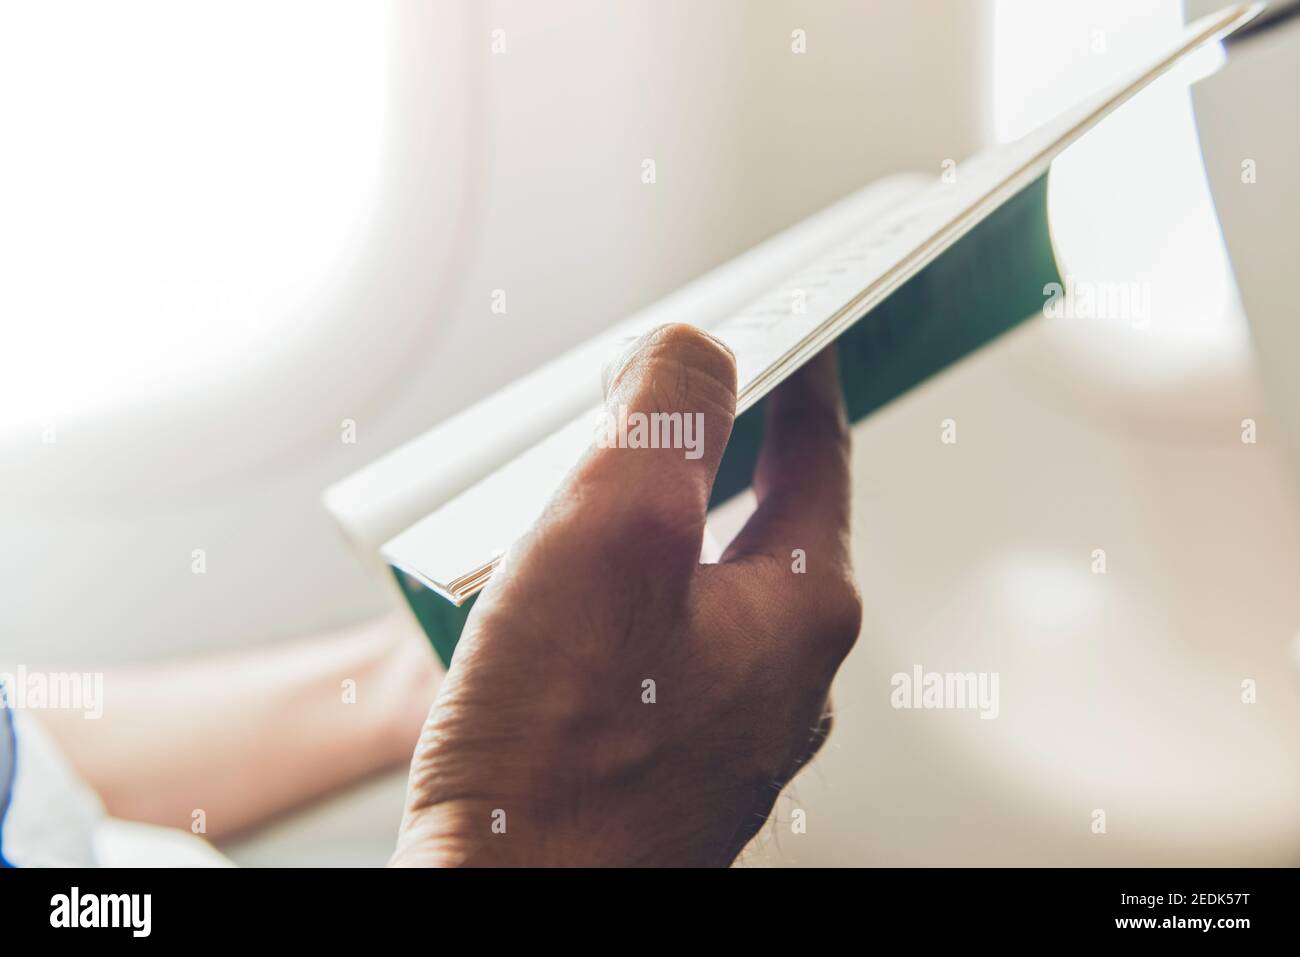 Male passenger killing time by reading book while traveling on the plane Stock Photo